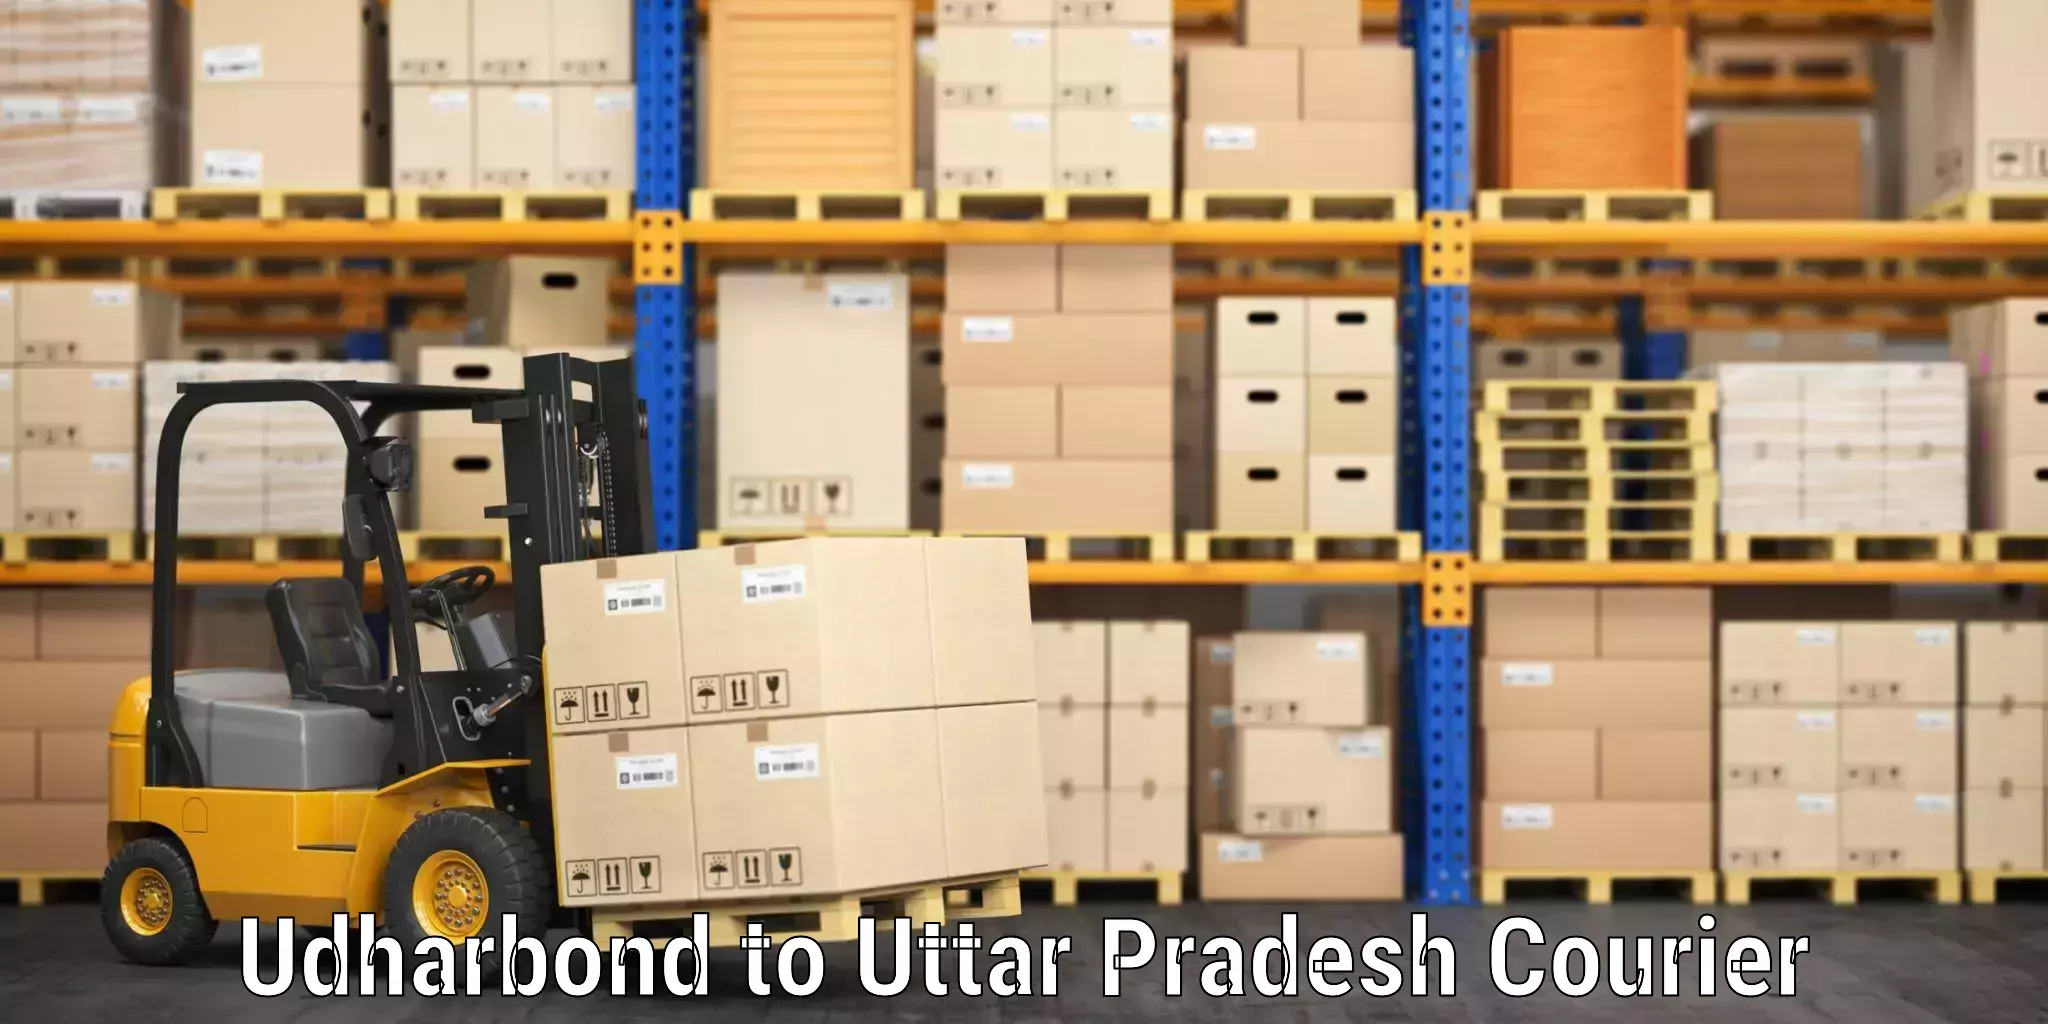 Baggage shipping experience Udharbond to Hapur